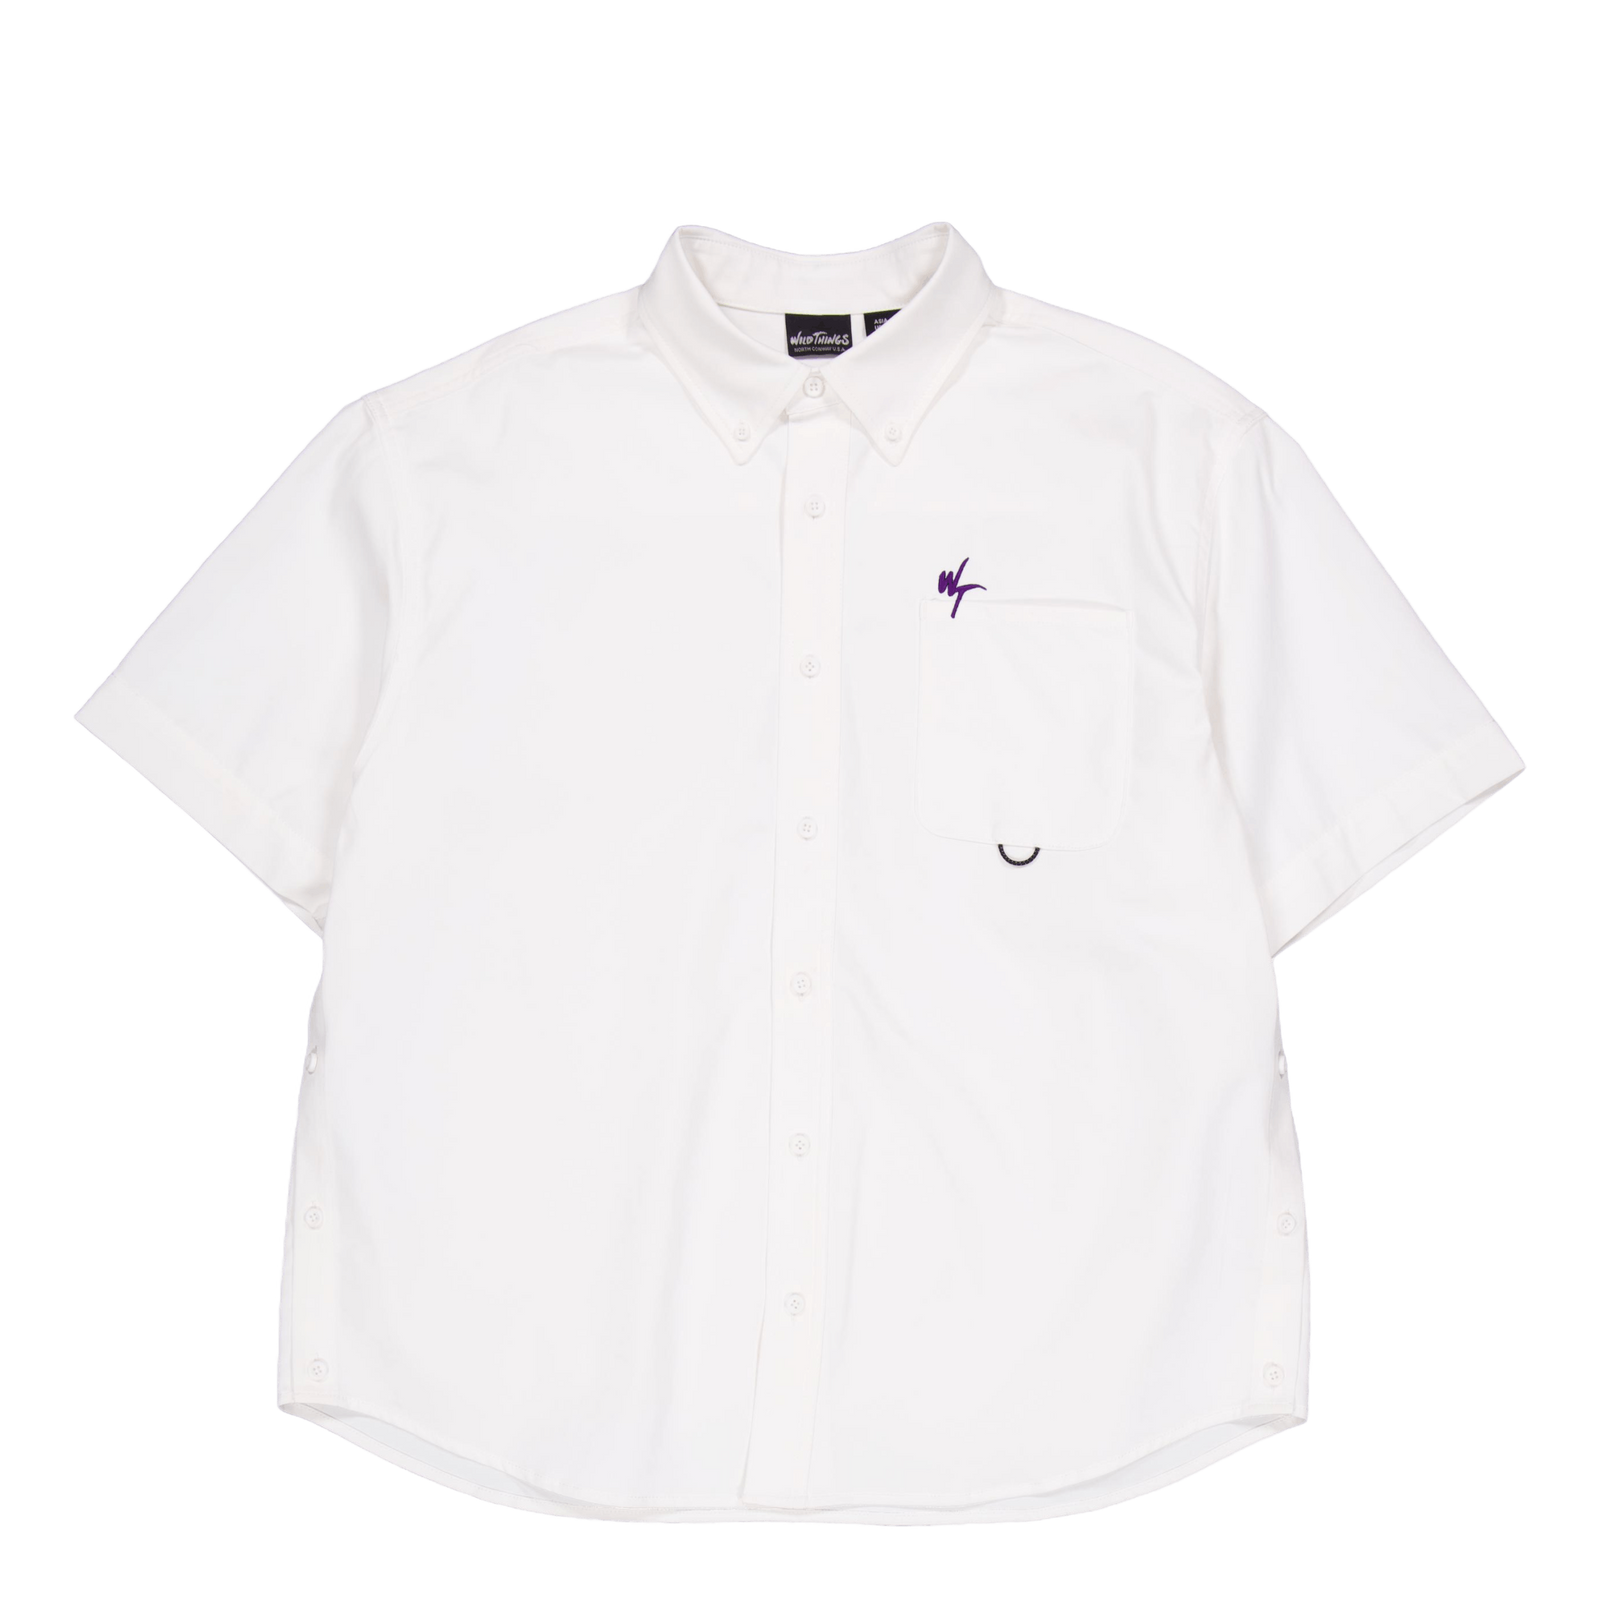 Wt Embroidery Bd Shirt White